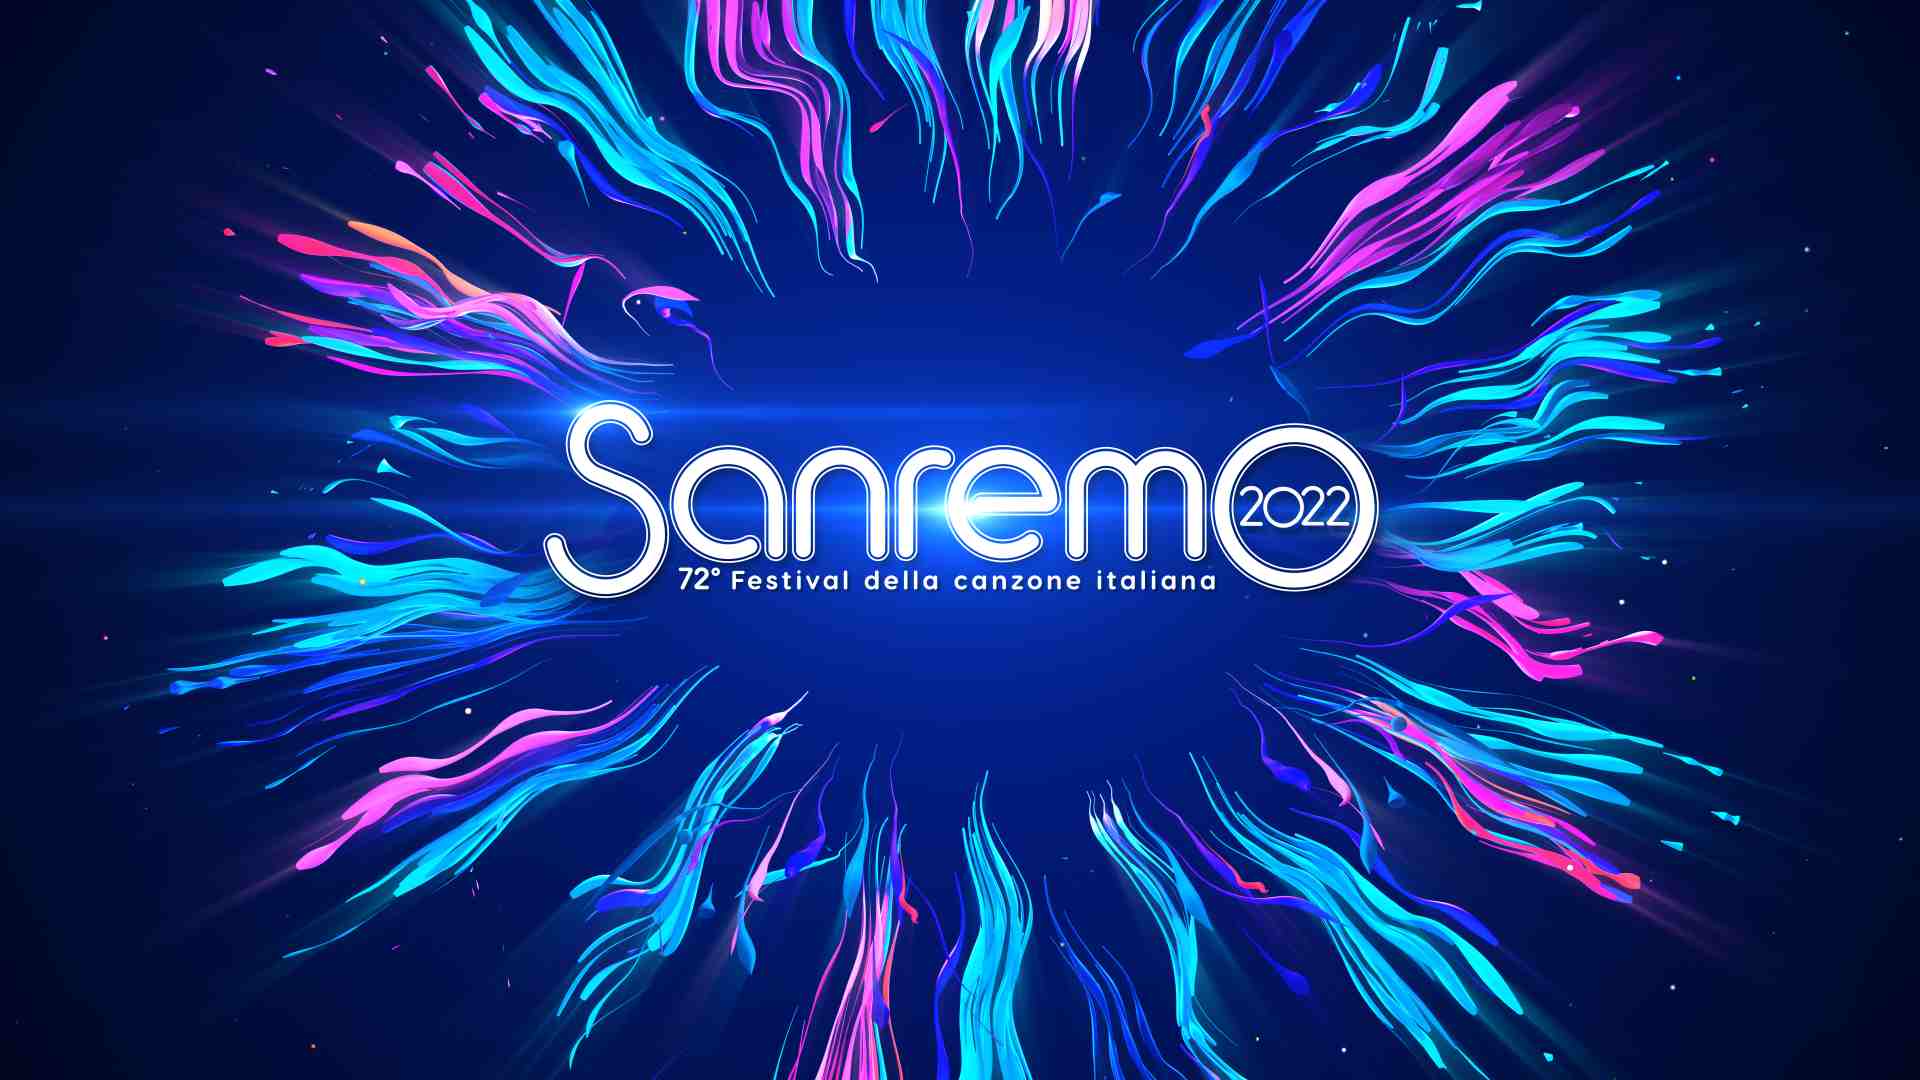 The new Suzuki S-Cross Hybrid is the Official Car of the Sanremo Festival 2022 thumbnail